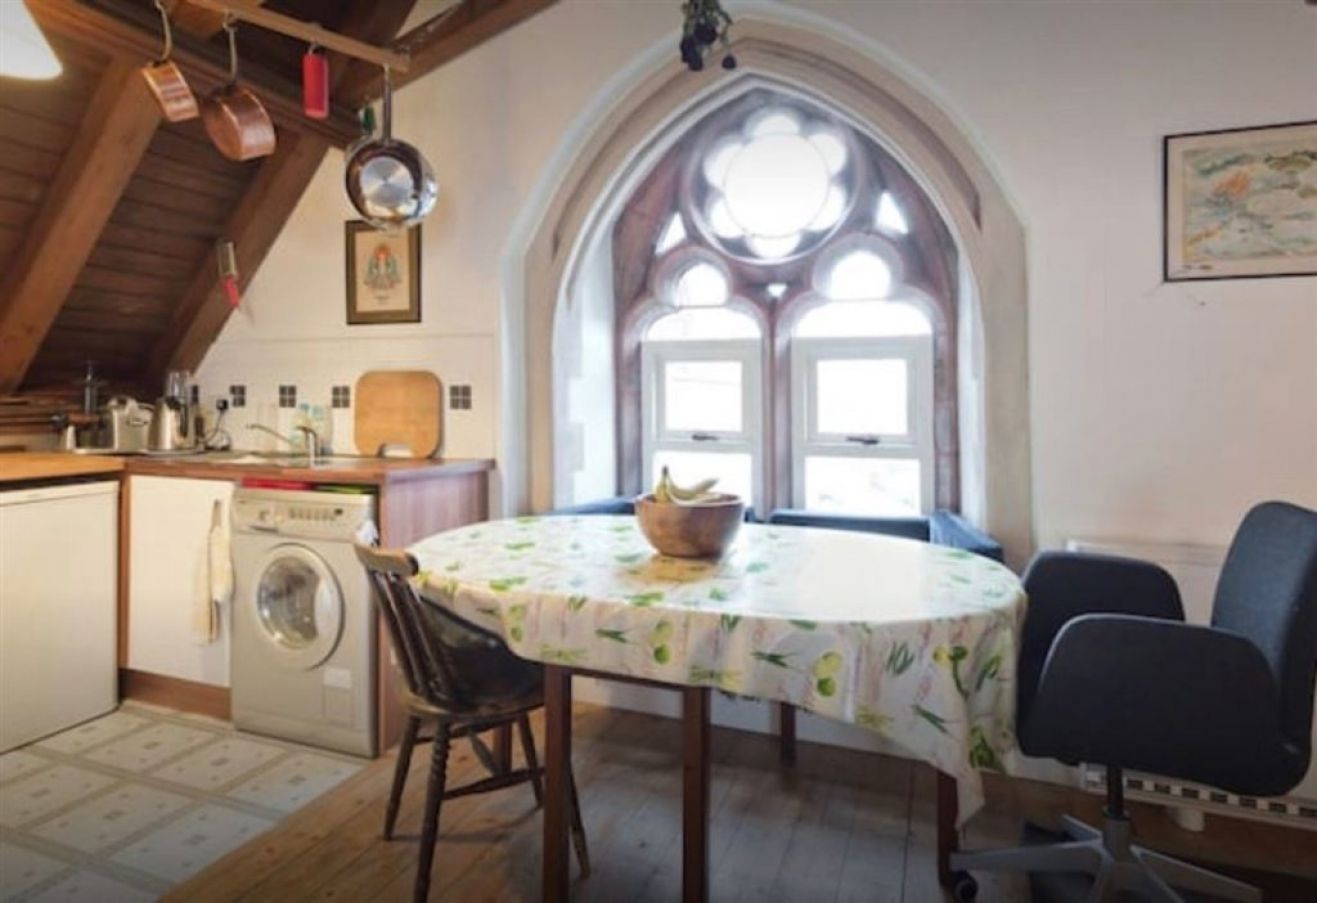 The Studio Comes Complete With Many Of The Church’s Original Features Dating From 1883. Photo Courtesy Of Dng Estate Agents.